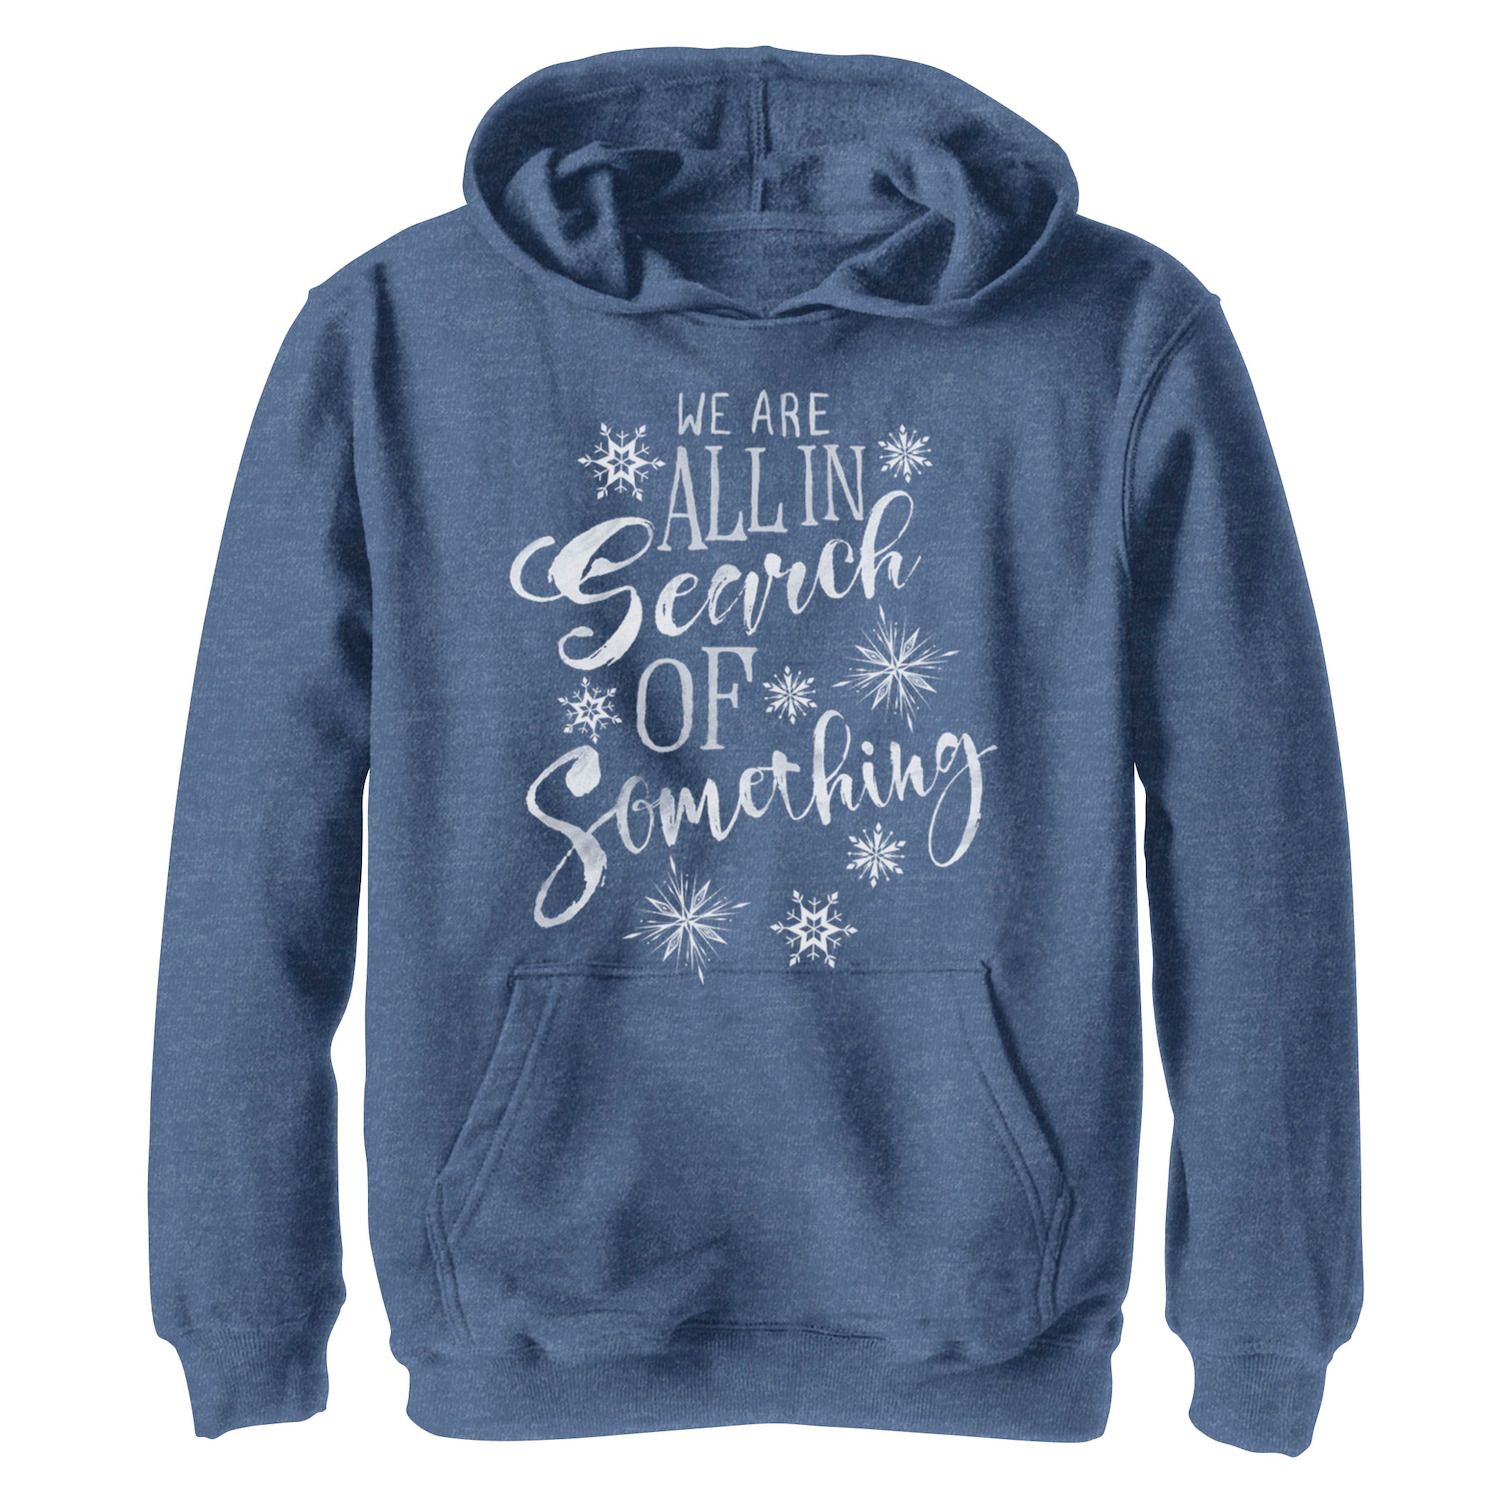 Image for Disney 's Frozen 2 Boys 8-20 In Search Of Something Snowflakes Graphic Hoodie at Kohl's.